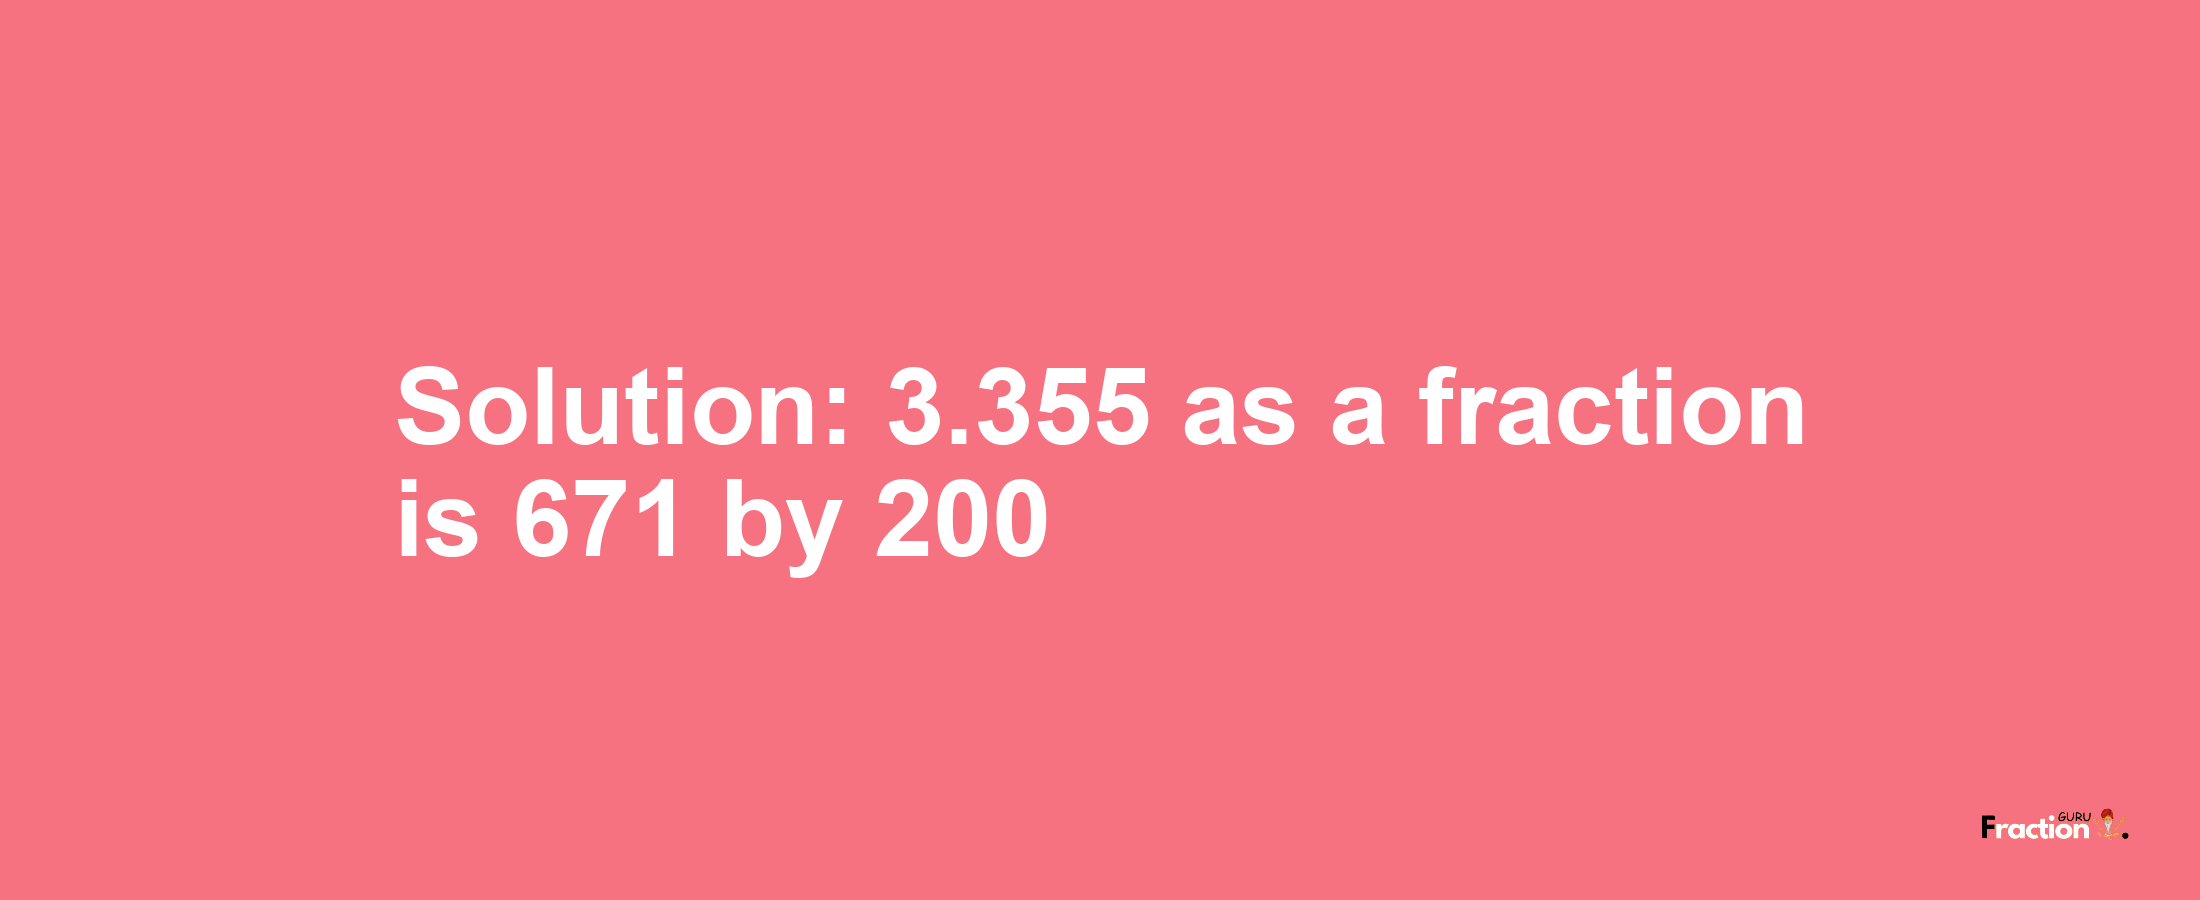 Solution:3.355 as a fraction is 671/200